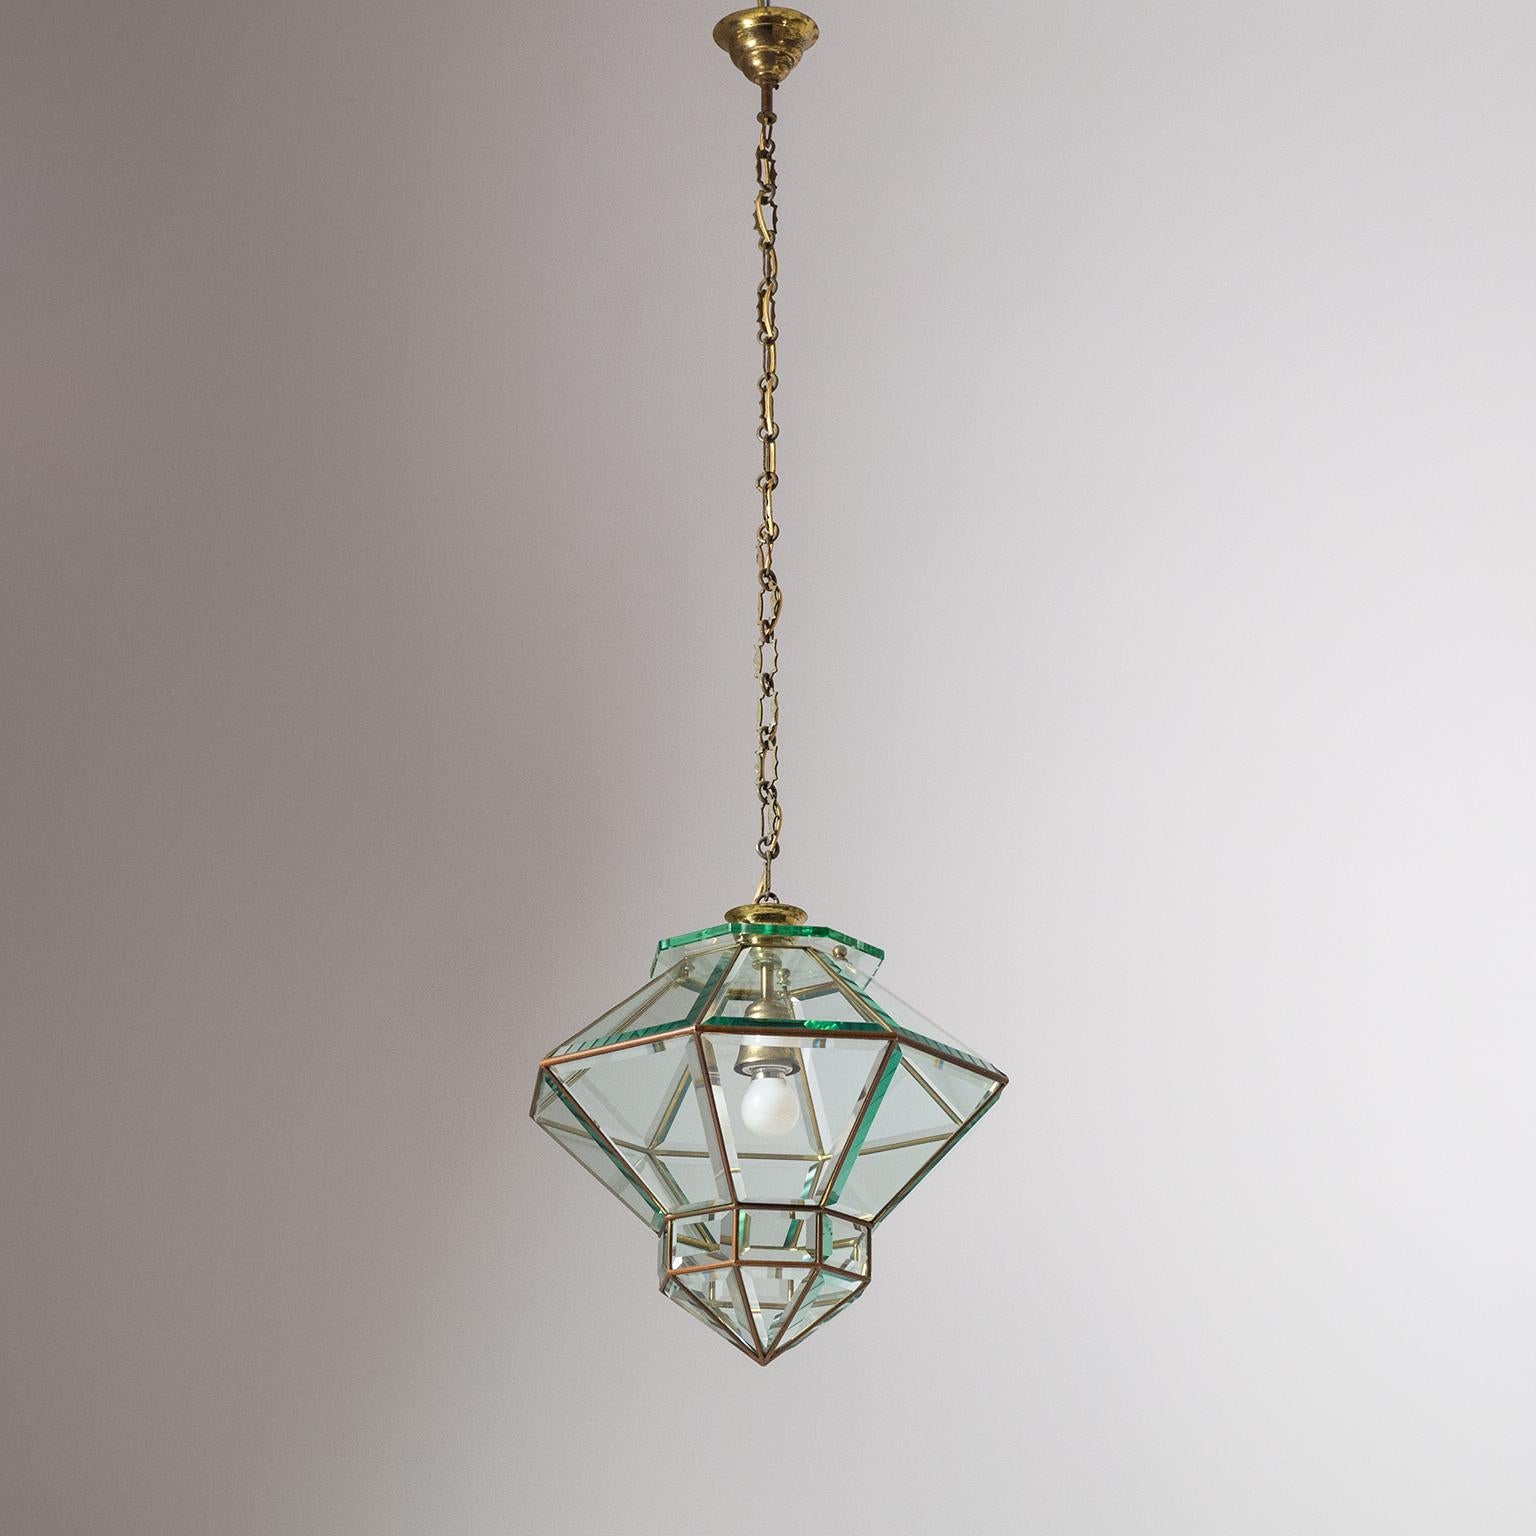 Fine Italian lantern with faceted glass from the 1940s. Unique octagonal gemstone cut shape with thick faceted glass elements inserted into a brass frame. Nice original condition with a light patina on the brass, heavy patina on the original iron